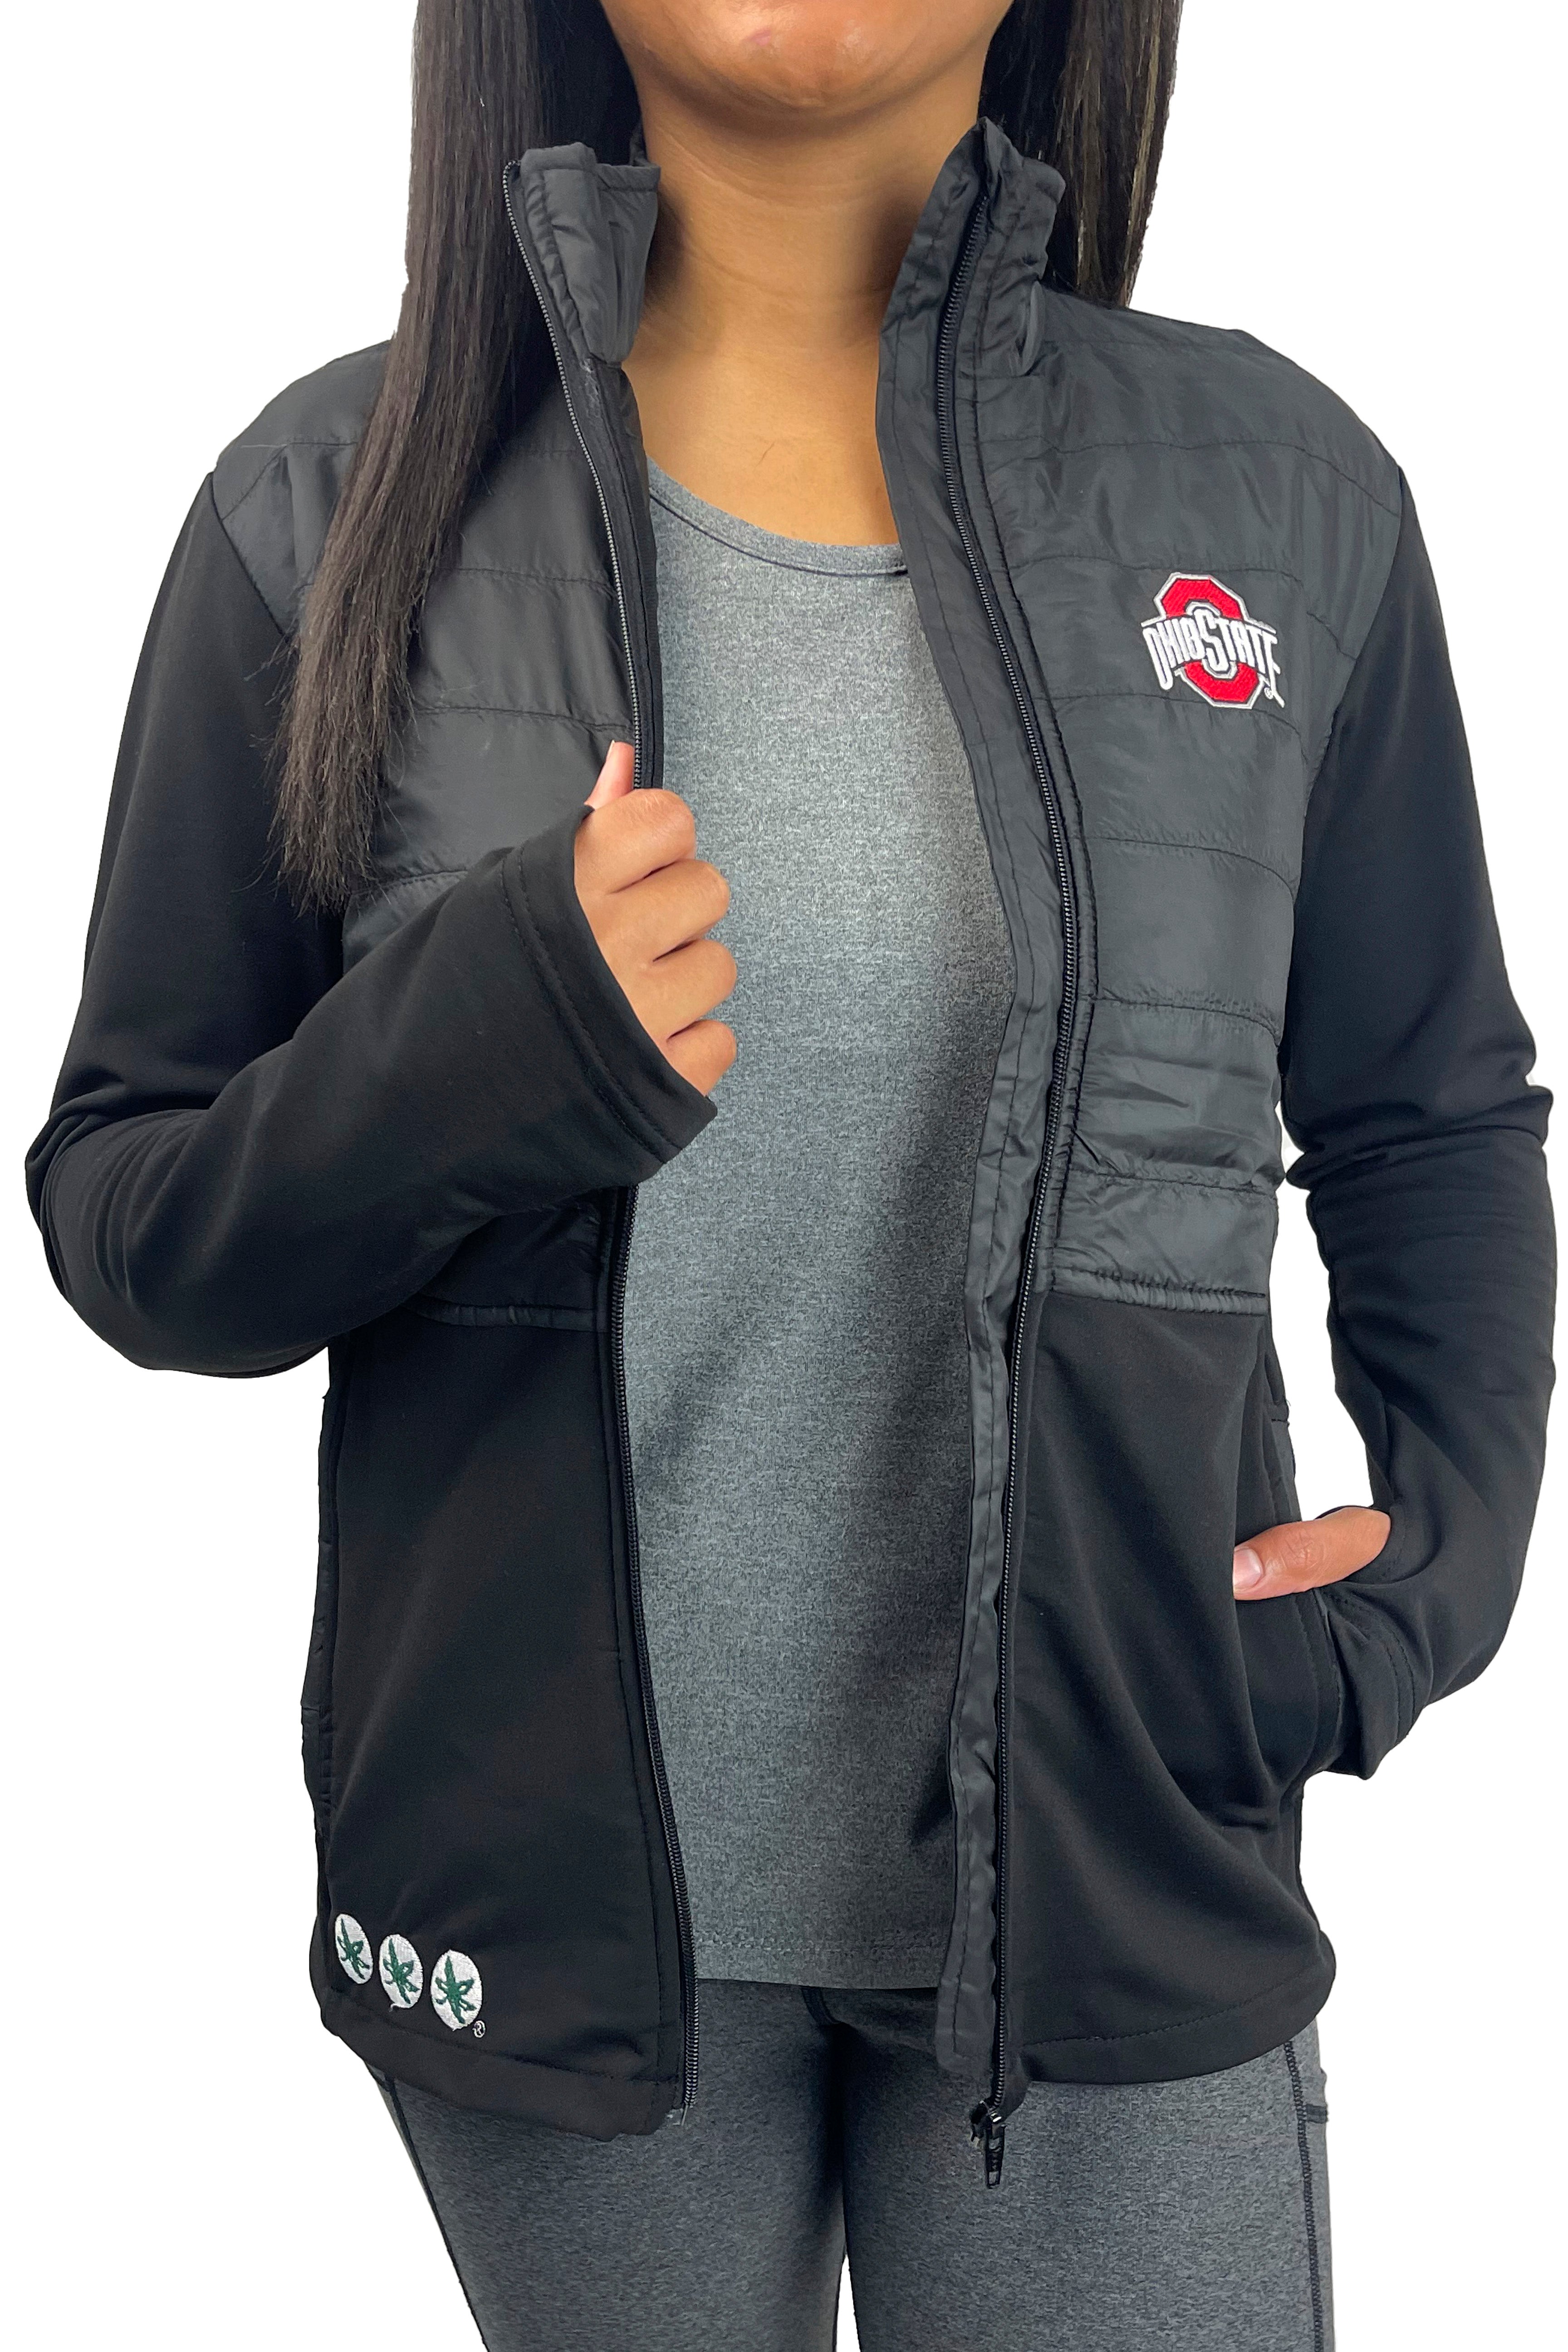 1404 - Ohio State Full Zip Fitted Performance Jacket / Black